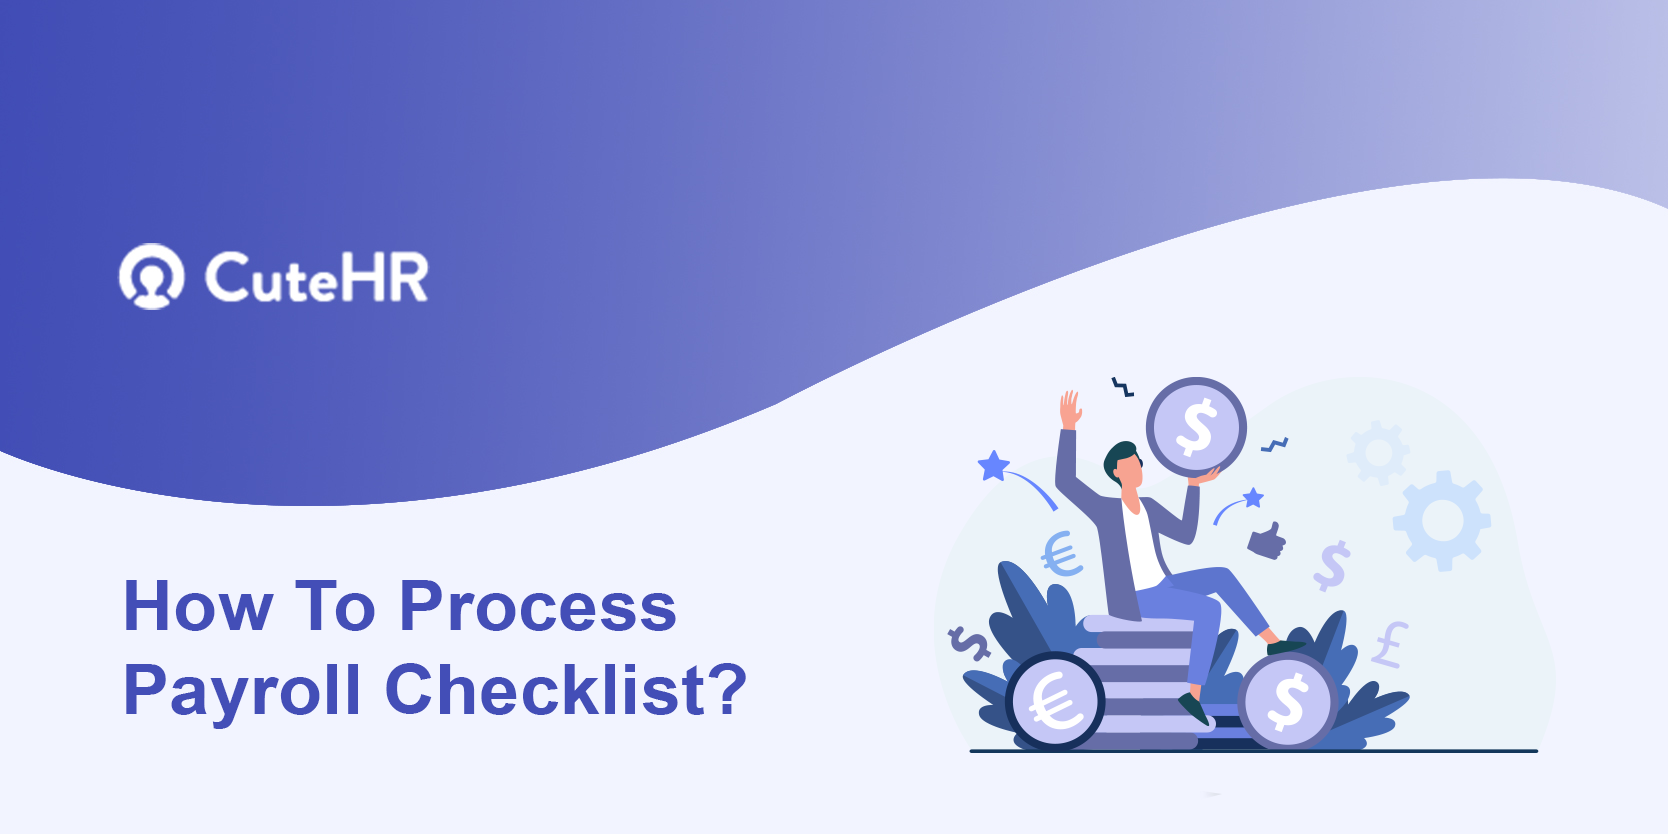 How To Process Payroll Checklist?